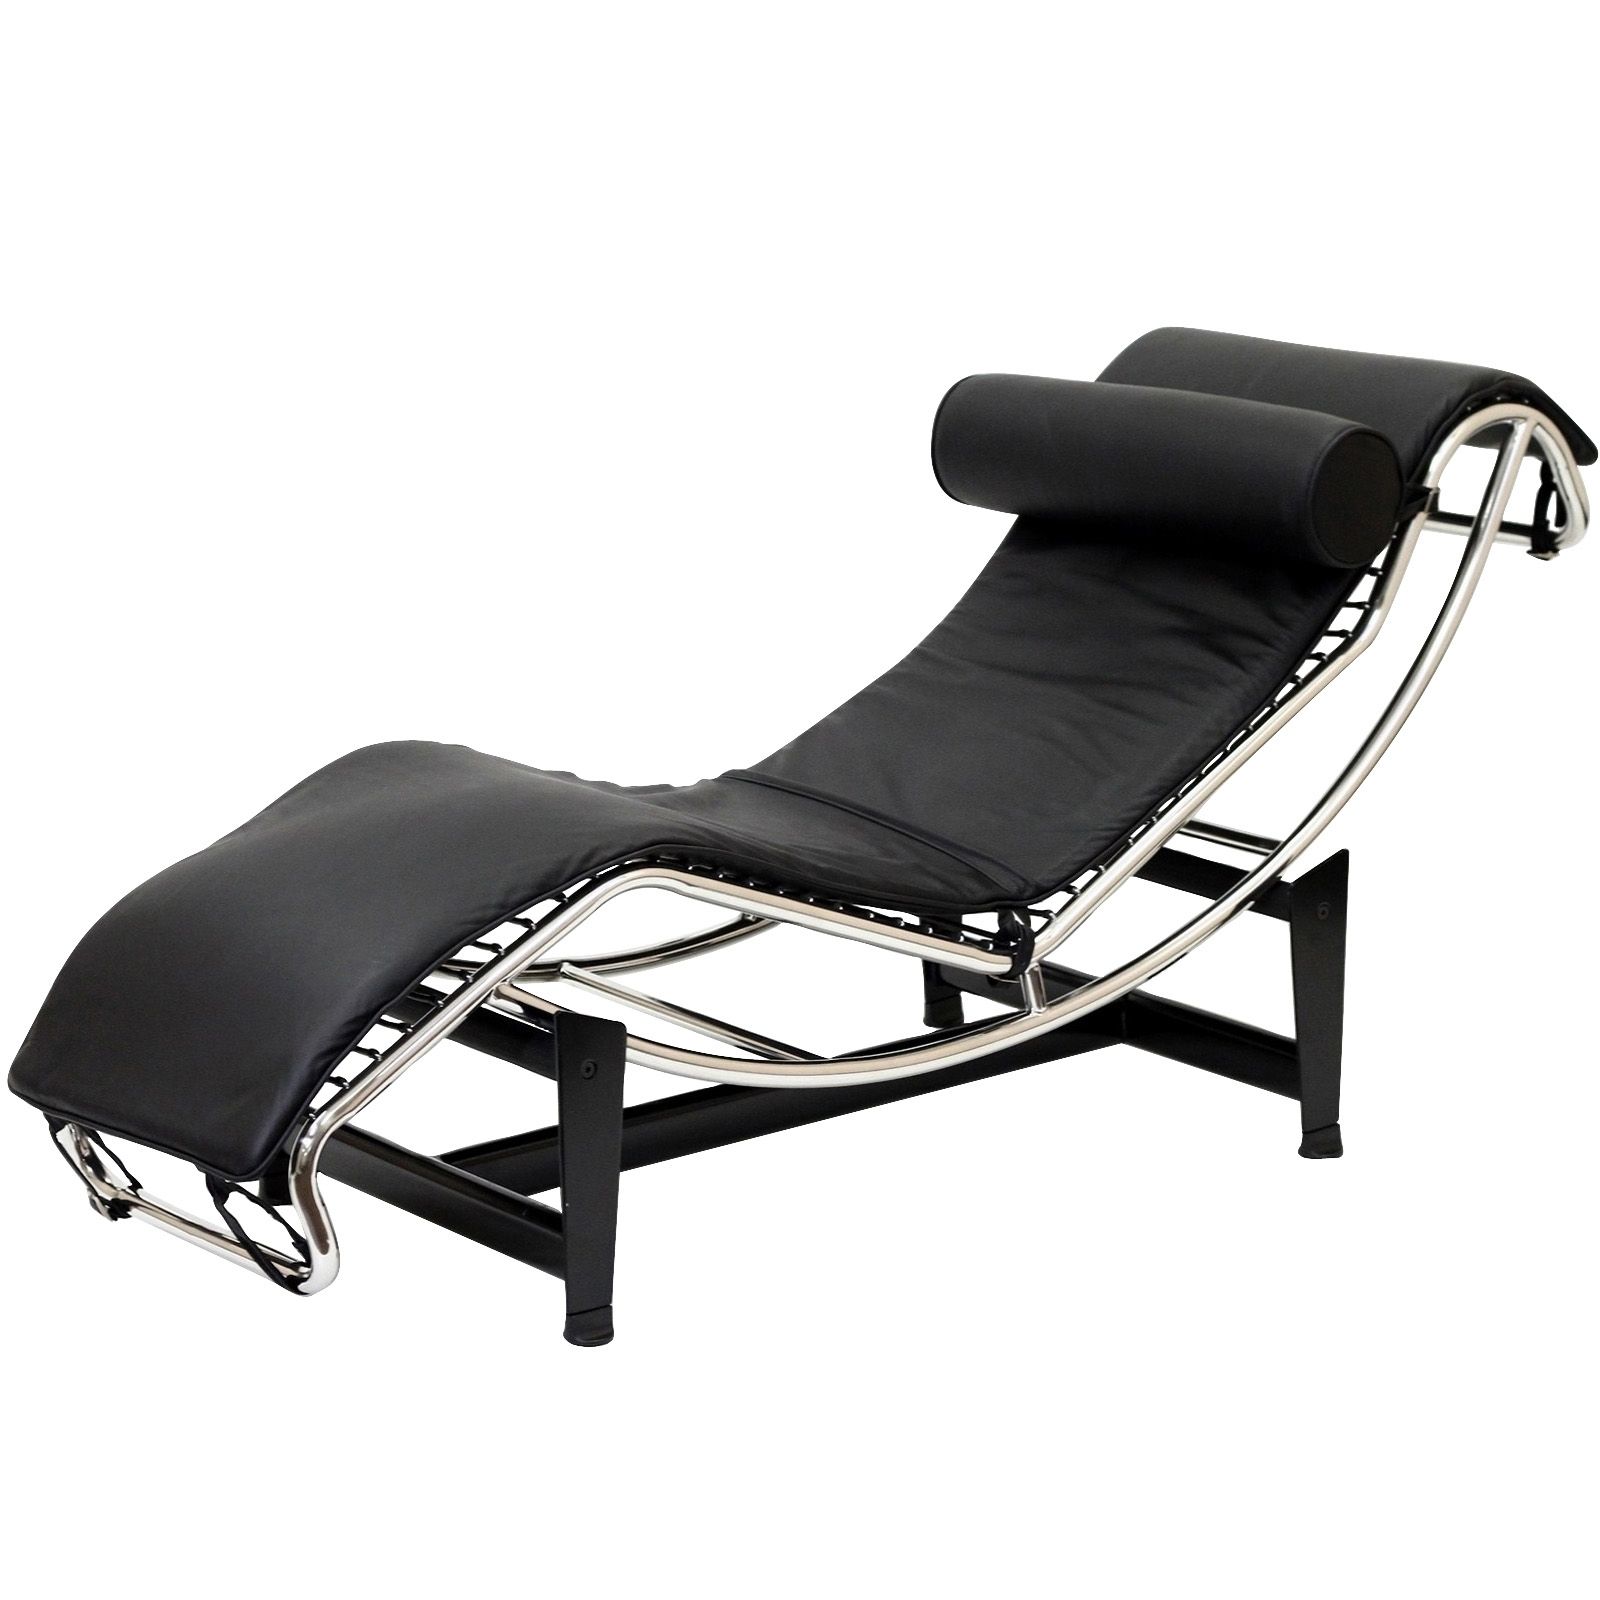 Leather Chaise Lounge Chair – Decofurnish For Most Recently Released Black Leather Chaise Lounge Chairs (View 7 of 15)